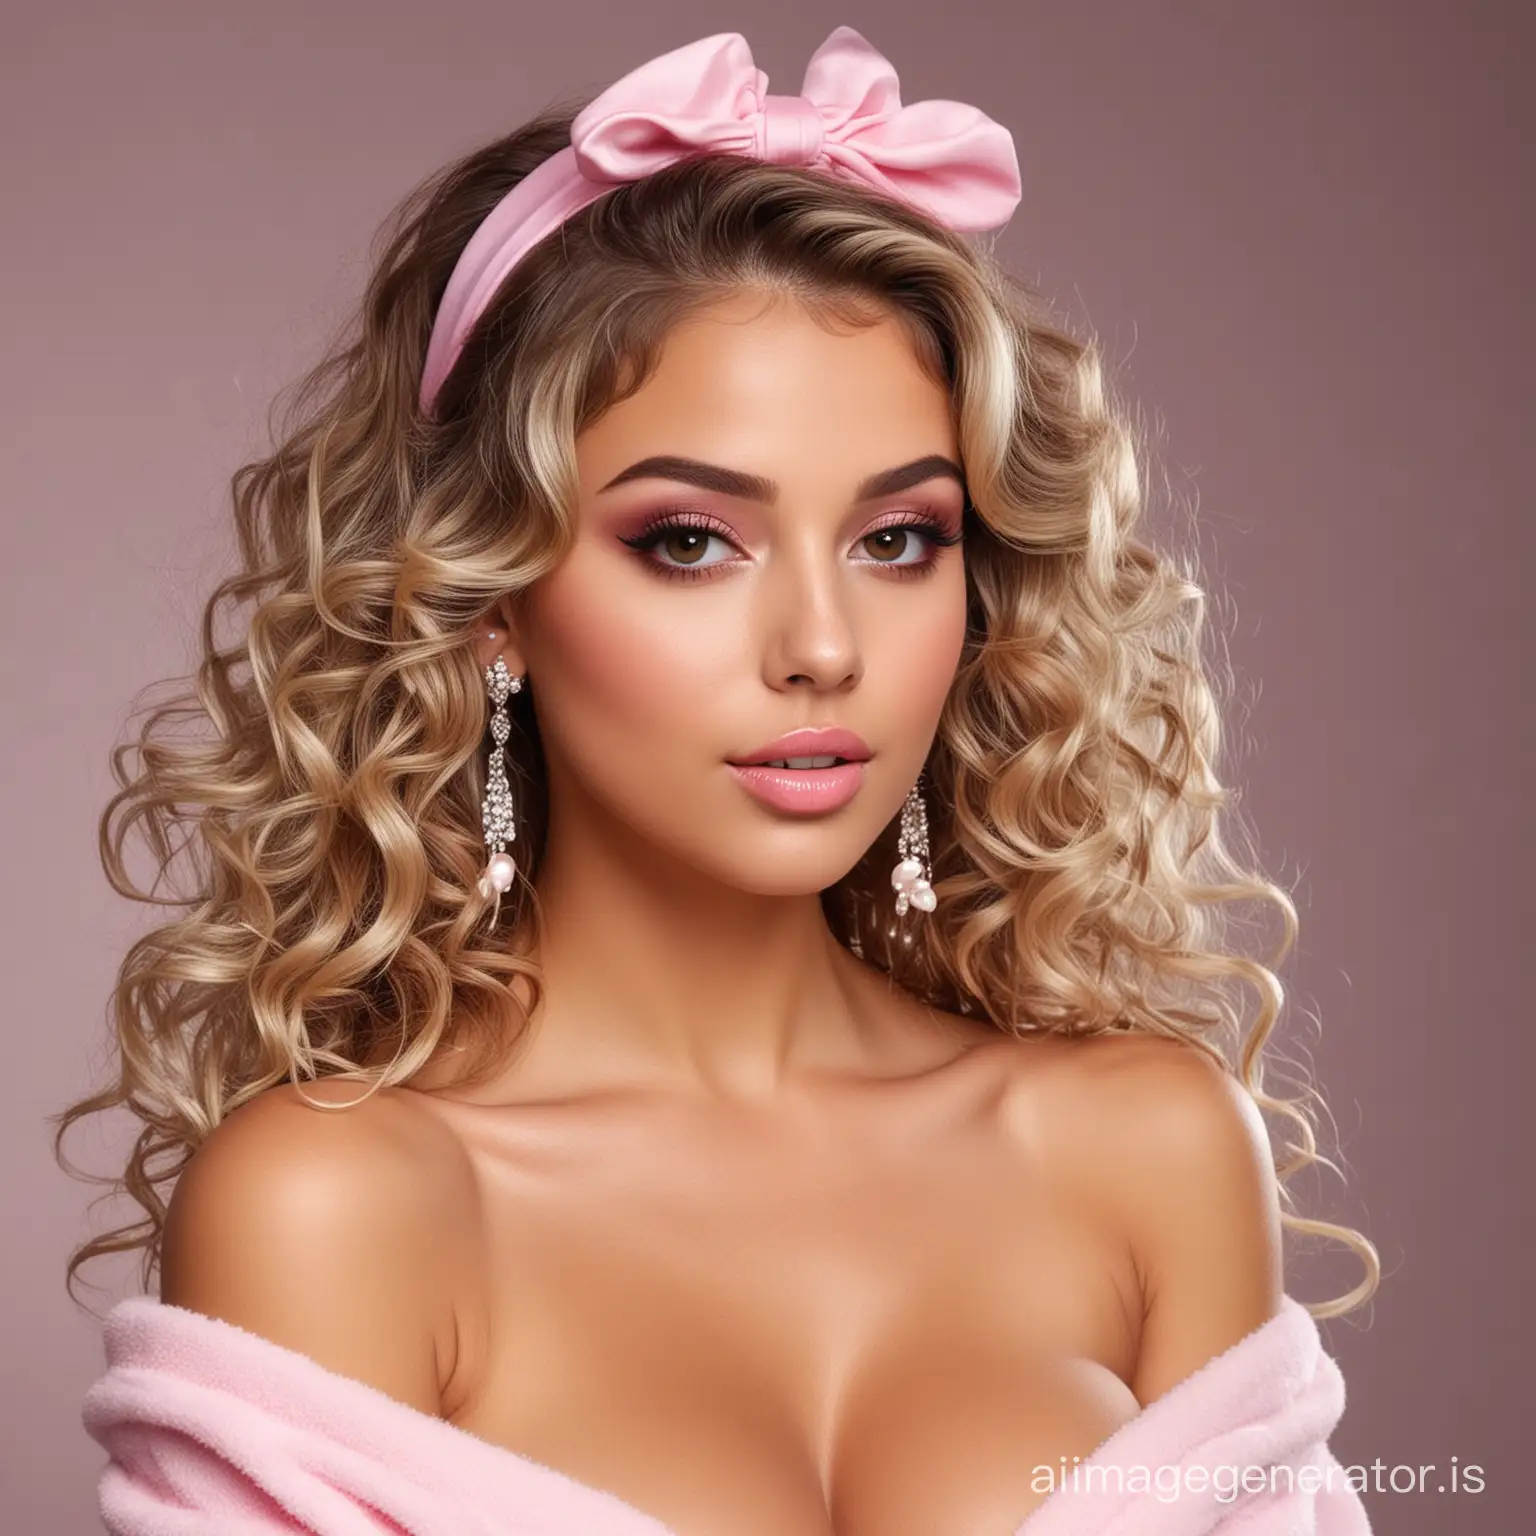 beautiful young lady with big dark brown eyes, small nose. Thick, painted lips with lots of lip gloss. Long blow dry curls in blonde. Spray tan brown skin. Pink makeup. Headband and long earrings. Slim body with big breasts, narrow waist and wide ass. Dressed very femininely with bare shoulders. She's smoking hot. Full body.